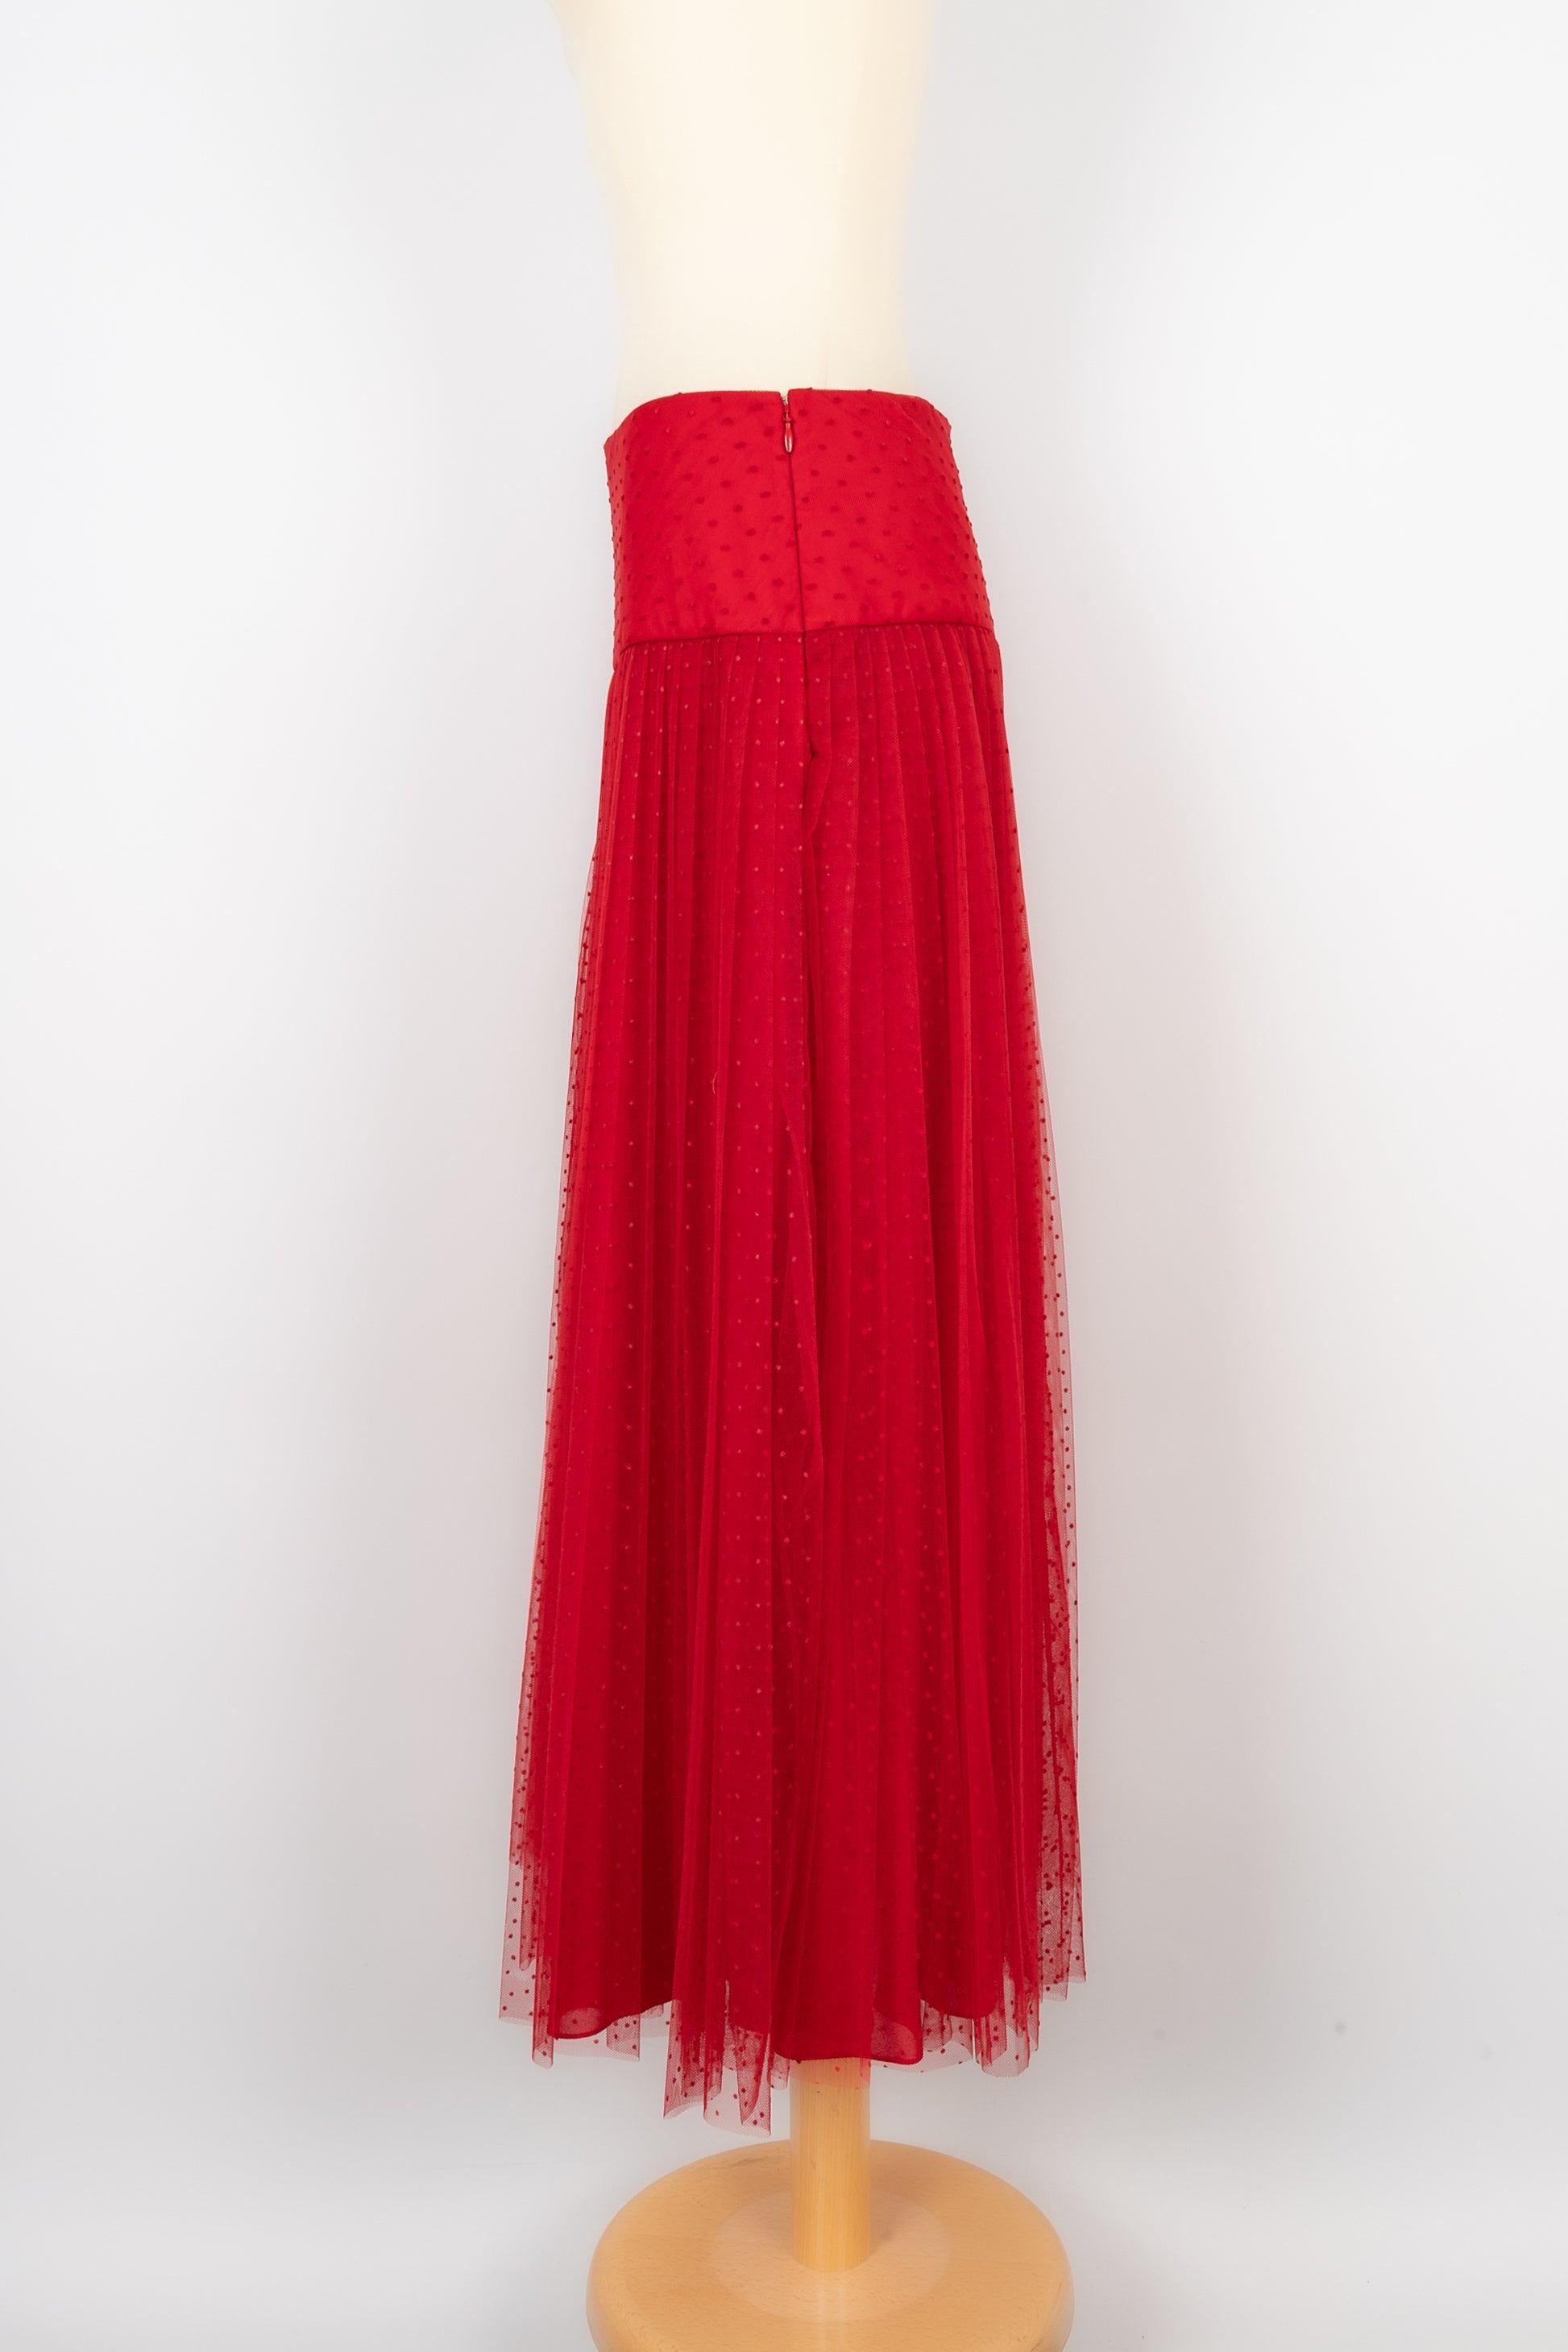 Dior- (Made in France) Long red tulle skirt. No size nor composition label, it fits a 38FR.

Additional information:
Condition: Very good condition
Dimensions: Waist: 35 cm - Length: 83 cm
Seller Reference: FJ115
